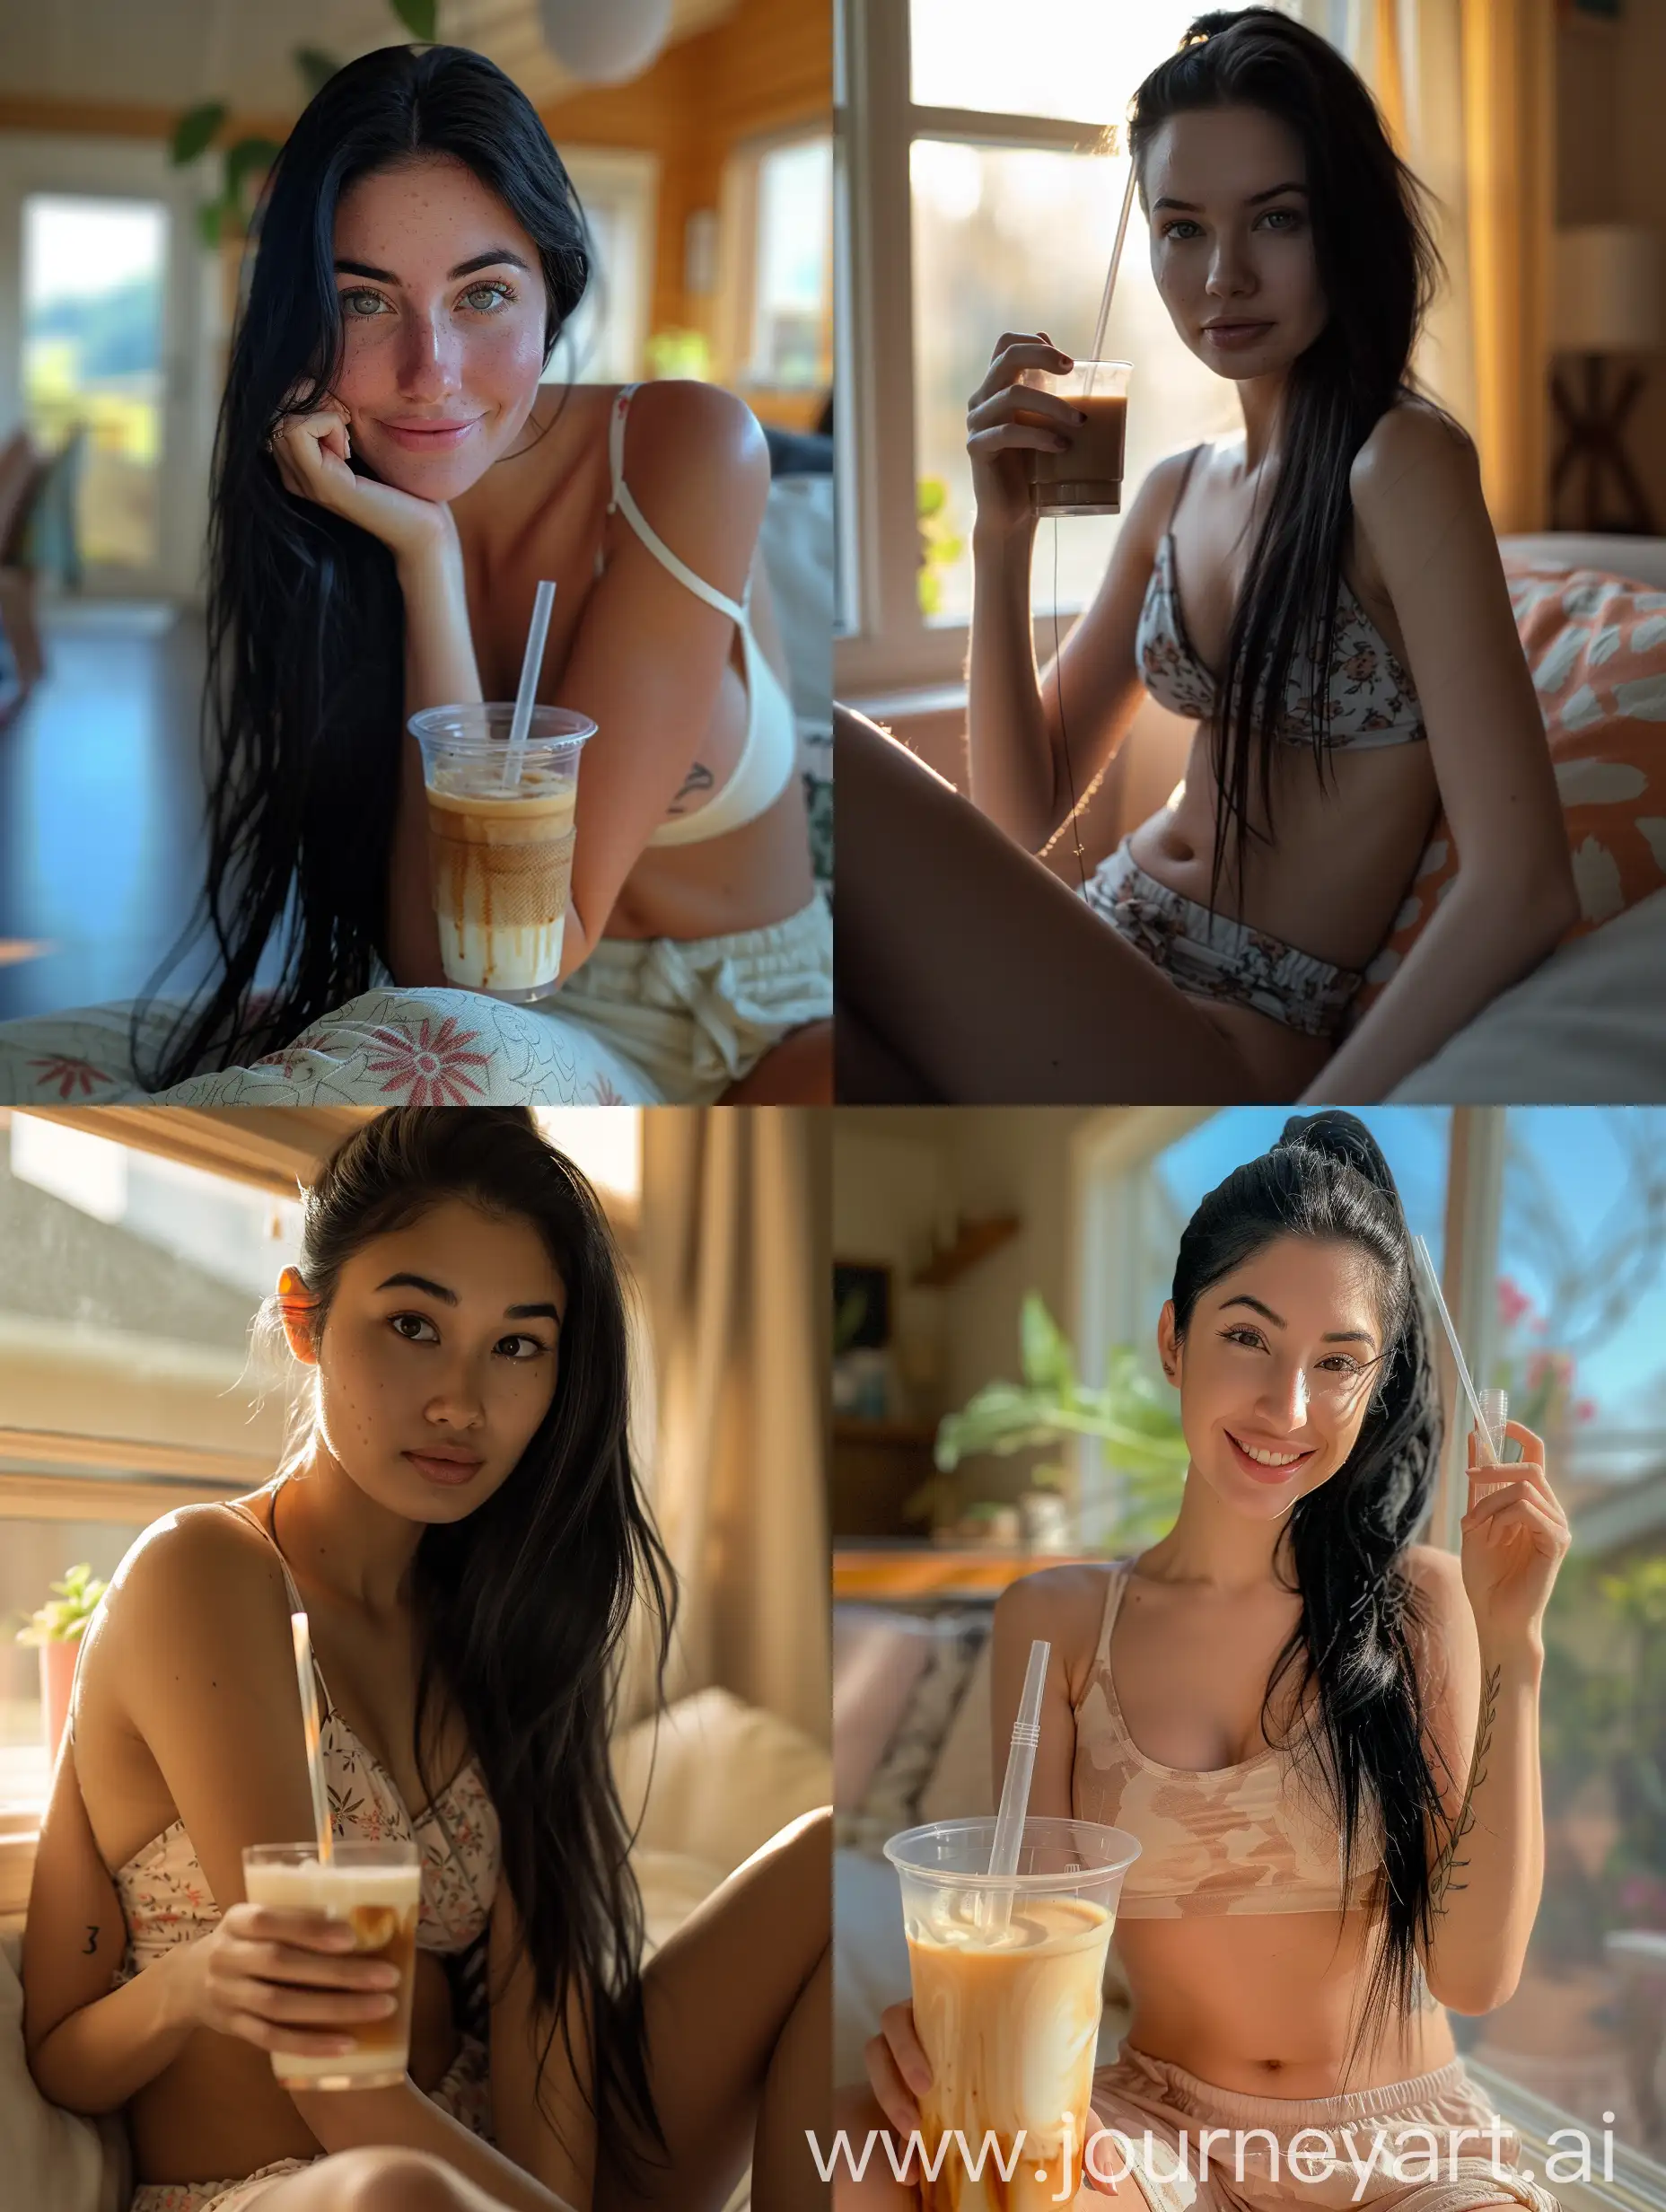 Raw photo, solo female, american, best quality、high resolution, photorealistic, hyper detailed, beautiful woman with (long brushed black hair:1.2), taken (webcam photo angle:1.2,), ((wearing complete top and bottom loungewear:1.1)) comfy clothing, (interior cozy suburban home, (afternoon)), sitting with coffee drink and straw, (comfortable), lovely sweet woman, dimples, ultra high res, RAW, relaxed arms, (hands are not in her lap), open, inviting gestures, warm and pleasant, posting from home living room, intimate POV, (she's close to webcamera:1.1))、a beautiful woman (High detailed skin:1.2), detailed eyes, ((video call))l asmr pov, (blushing:1.7,smiling:0.3, ), Leica camera quality, Digital SLR, Soft lighting, High quality, FujifilmXT3, afteroon sun、Taken inside her home、Sit down close to her, skin peachfuzz and pore details, radiant、natural Golden blonde hair in ponytail, A slight smile、american south Swedish, eye gazing with her, intimate relaxed style photoshoot